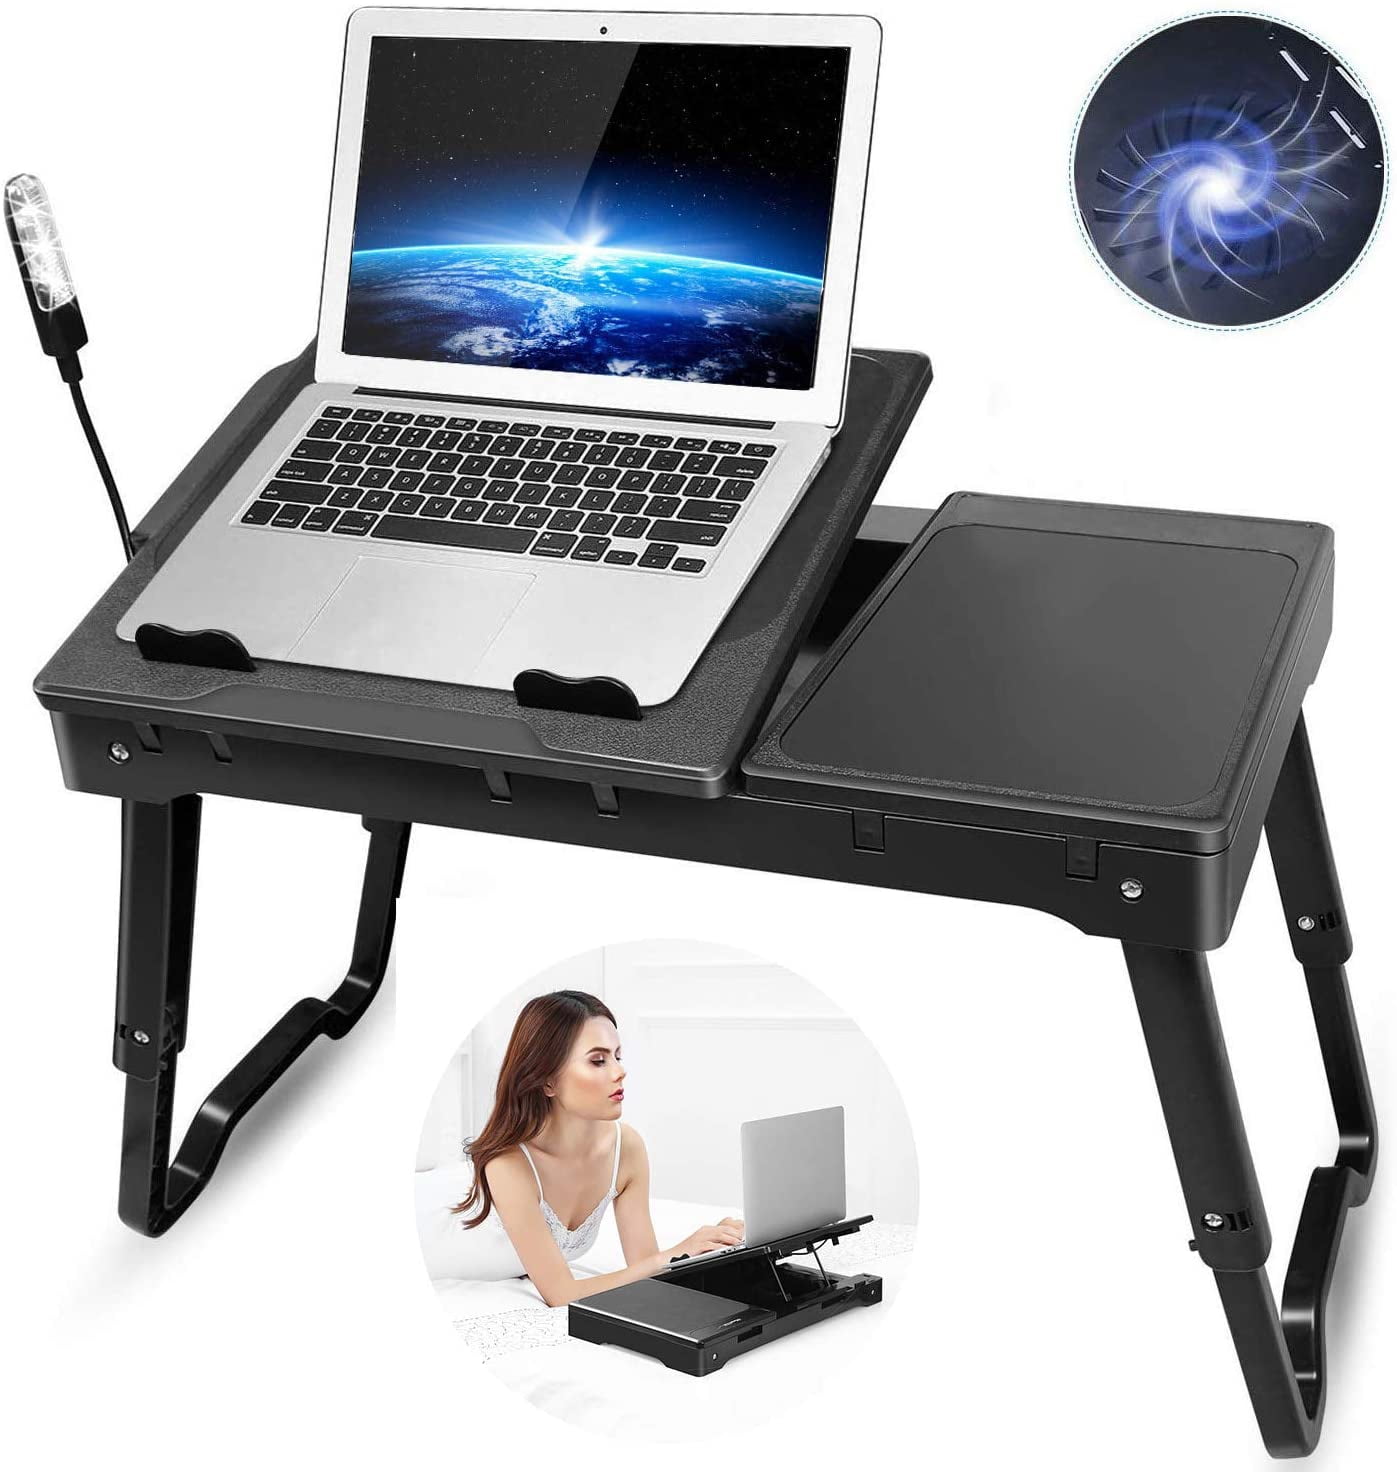 Laptop-Table Laptop Computer Stand for 14-17 inch Laptop Foldable Sofa Notebook Stand Bed Tray with 4 Adjustable Levels MIEBEC01 